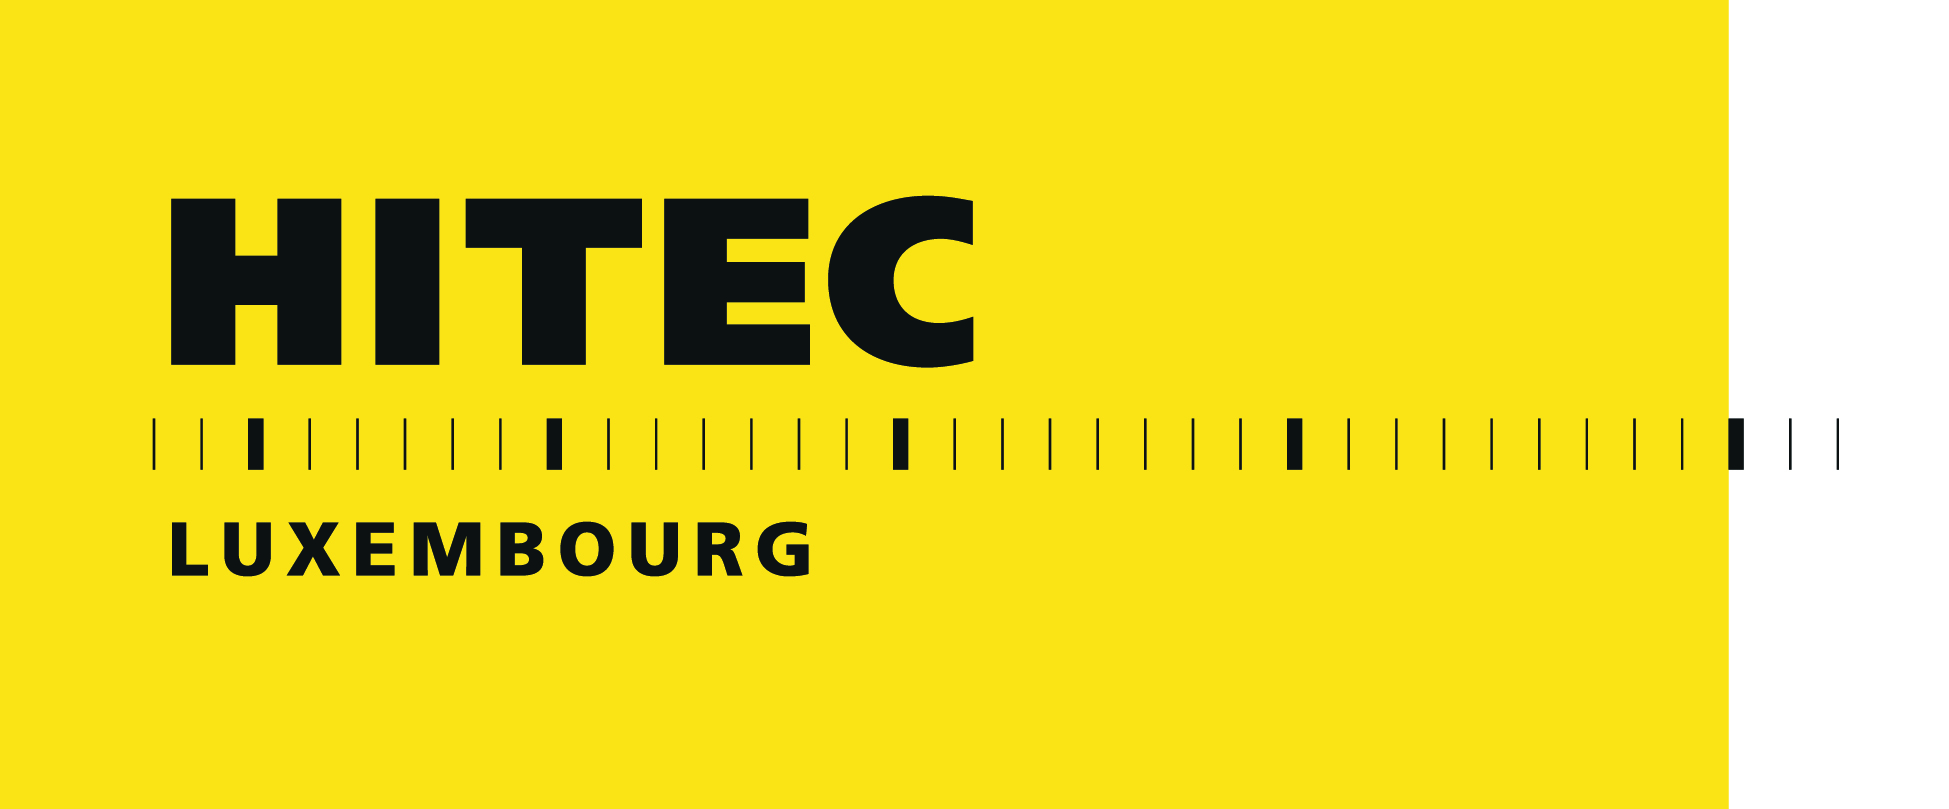 HITEC Luxembourg S.A.